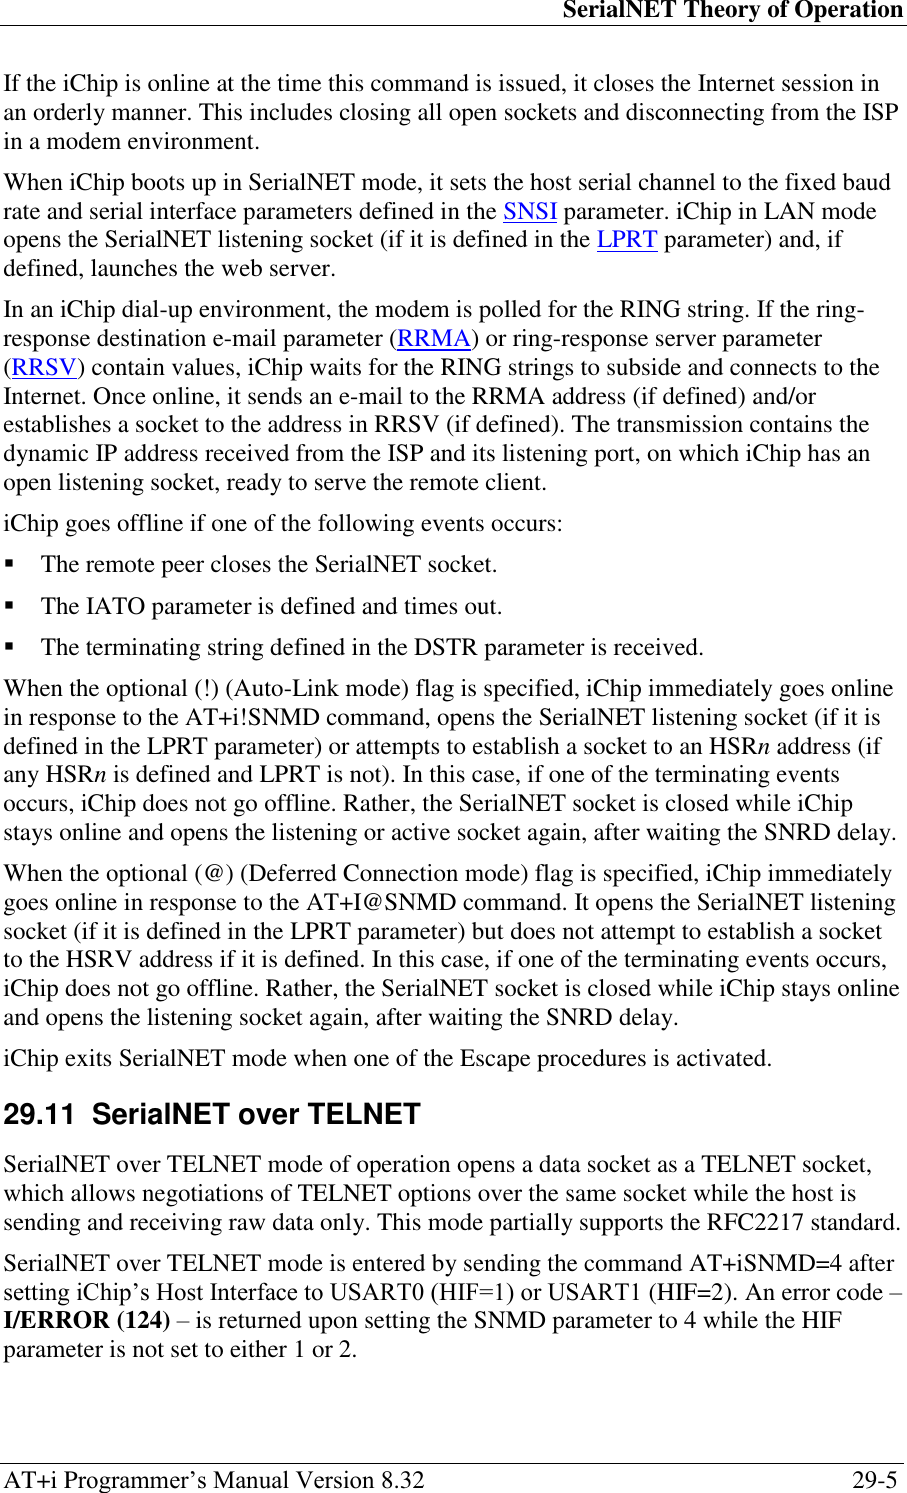 SerialNET Theory of Operation AT+i Programmer‘s Manual Version 8.32  29-5 If the iChip is online at the time this command is issued, it closes the Internet session in an orderly manner. This includes closing all open sockets and disconnecting from the ISP in a modem environment. When iChip boots up in SerialNET mode, it sets the host serial channel to the fixed baud rate and serial interface parameters defined in the SNSI parameter. iChip in LAN mode opens the SerialNET listening socket (if it is defined in the LPRT parameter) and, if defined, launches the web server. In an iChip dial-up environment, the modem is polled for the RING string. If the ring-response destination e-mail parameter (RRMA) or ring-response server parameter (RRSV) contain values, iChip waits for the RING strings to subside and connects to the Internet. Once online, it sends an e-mail to the RRMA address (if defined) and/or establishes a socket to the address in RRSV (if defined). The transmission contains the dynamic IP address received from the ISP and its listening port, on which iChip has an open listening socket, ready to serve the remote client. iChip goes offline if one of the following events occurs:  The remote peer closes the SerialNET socket.  The IATO parameter is defined and times out.  The terminating string defined in the DSTR parameter is received. When the optional (!) (Auto-Link mode) flag is specified, iChip immediately goes online in response to the AT+i!SNMD command, opens the SerialNET listening socket (if it is defined in the LPRT parameter) or attempts to establish a socket to an HSRn address (if any HSRn is defined and LPRT is not). In this case, if one of the terminating events occurs, iChip does not go offline. Rather, the SerialNET socket is closed while iChip stays online and opens the listening or active socket again, after waiting the SNRD delay. When the optional (@) (Deferred Connection mode) flag is specified, iChip immediately goes online in response to the AT+I@SNMD command. It opens the SerialNET listening socket (if it is defined in the LPRT parameter) but does not attempt to establish a socket to the HSRV address if it is defined. In this case, if one of the terminating events occurs, iChip does not go offline. Rather, the SerialNET socket is closed while iChip stays online and opens the listening socket again, after waiting the SNRD delay. iChip exits SerialNET mode when one of the Escape procedures is activated. 29.11  SerialNET over TELNET SerialNET over TELNET mode of operation opens a data socket as a TELNET socket, which allows negotiations of TELNET options over the same socket while the host is sending and receiving raw data only. This mode partially supports the RFC2217 standard. SerialNET over TELNET mode is entered by sending the command AT+iSNMD=4 after setting iChip‘s Host Interface to USART0 (HIF=1) or USART1 (HIF=2). An error code – I/ERROR (124) – is returned upon setting the SNMD parameter to 4 while the HIF parameter is not set to either 1 or 2. 